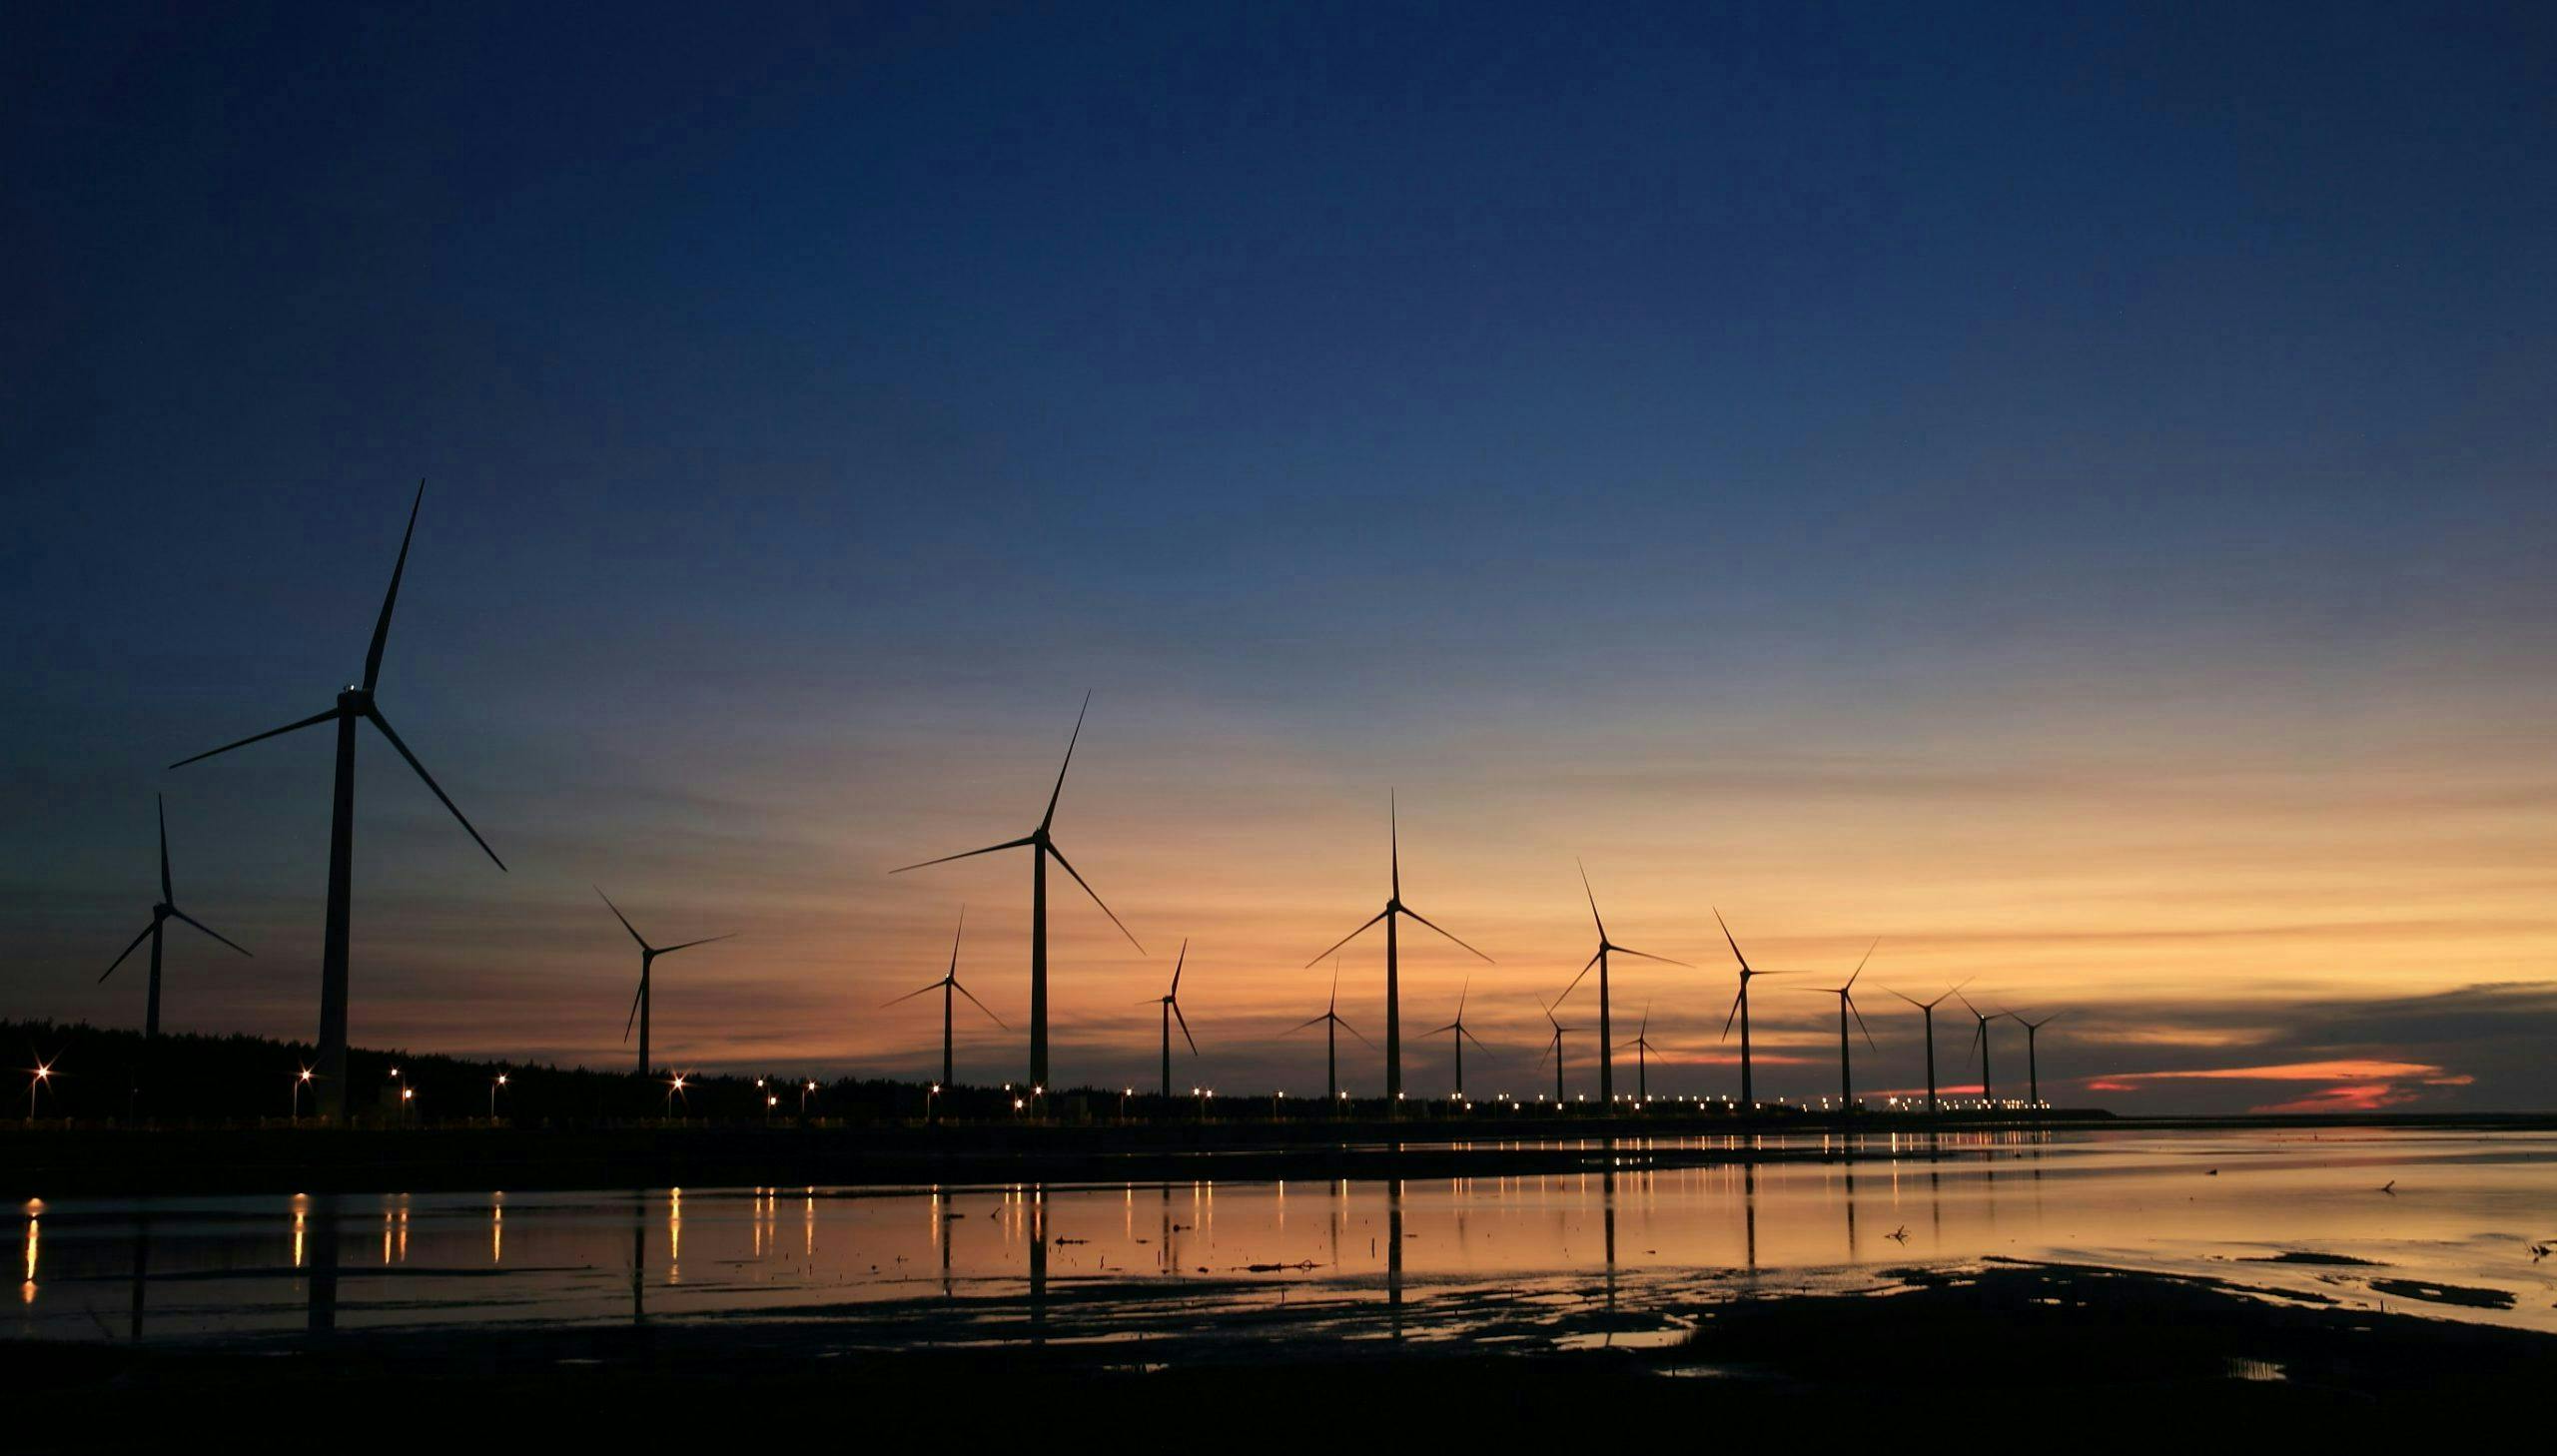 Wind turbines standing still, silhouetted against a dramatic sunset sky, are lined up along a coastal shoreline reflecting on calm water.